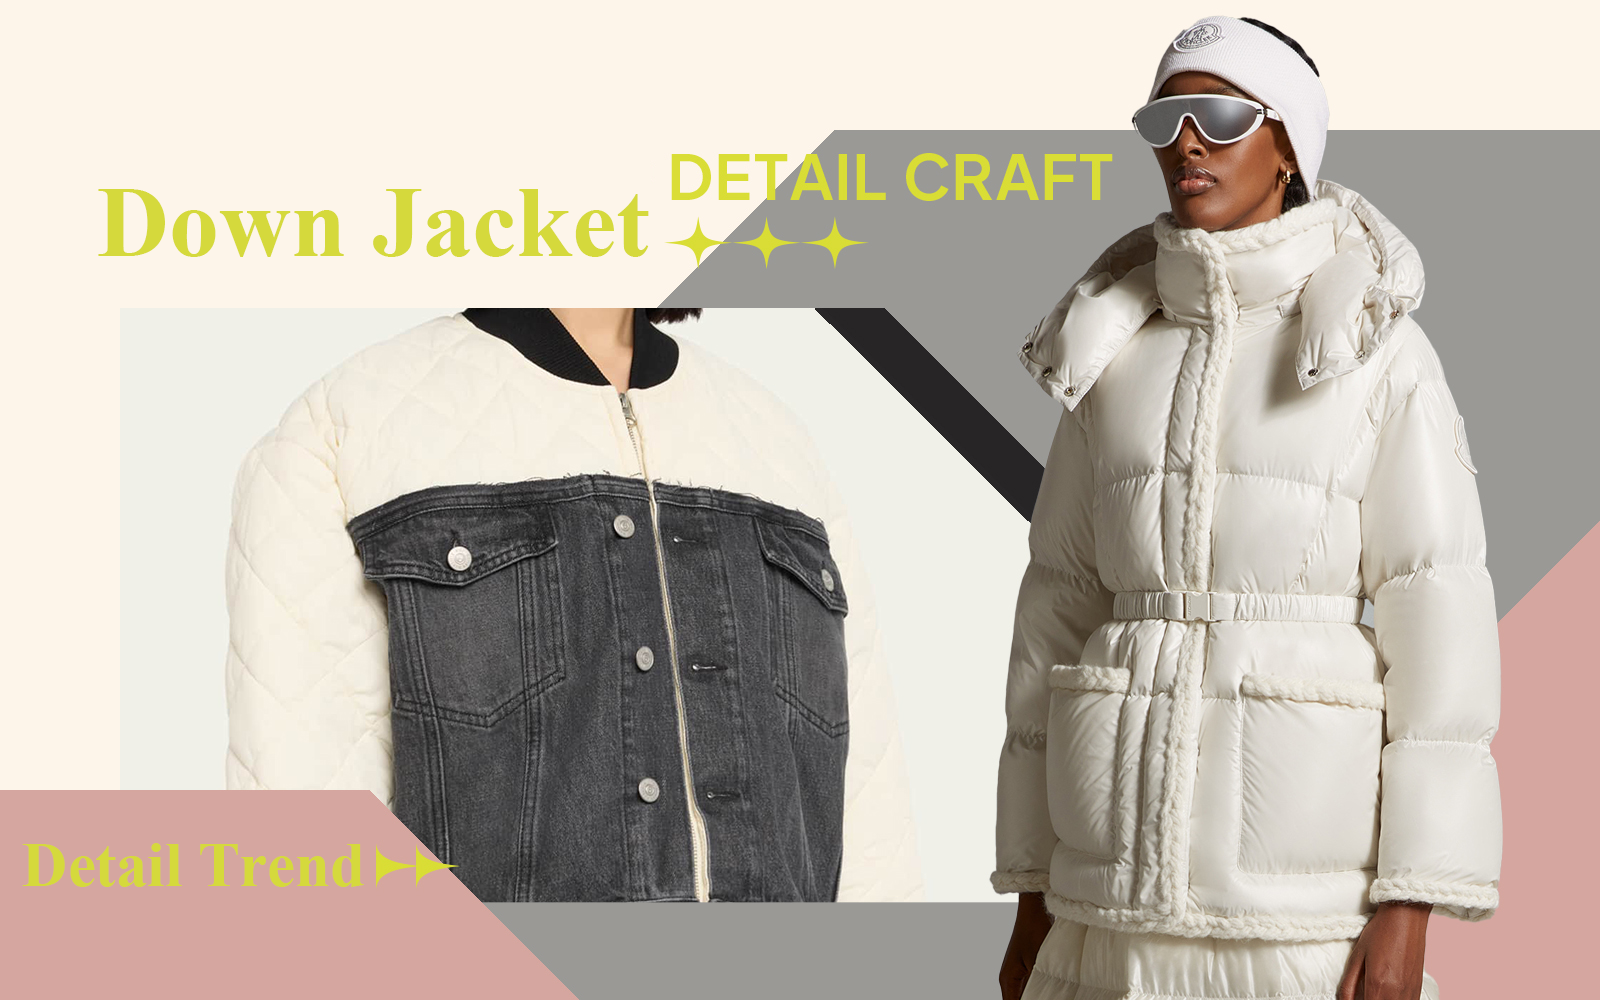 Recombination -- The Detail & Craft Trend for Women's Down Jacket